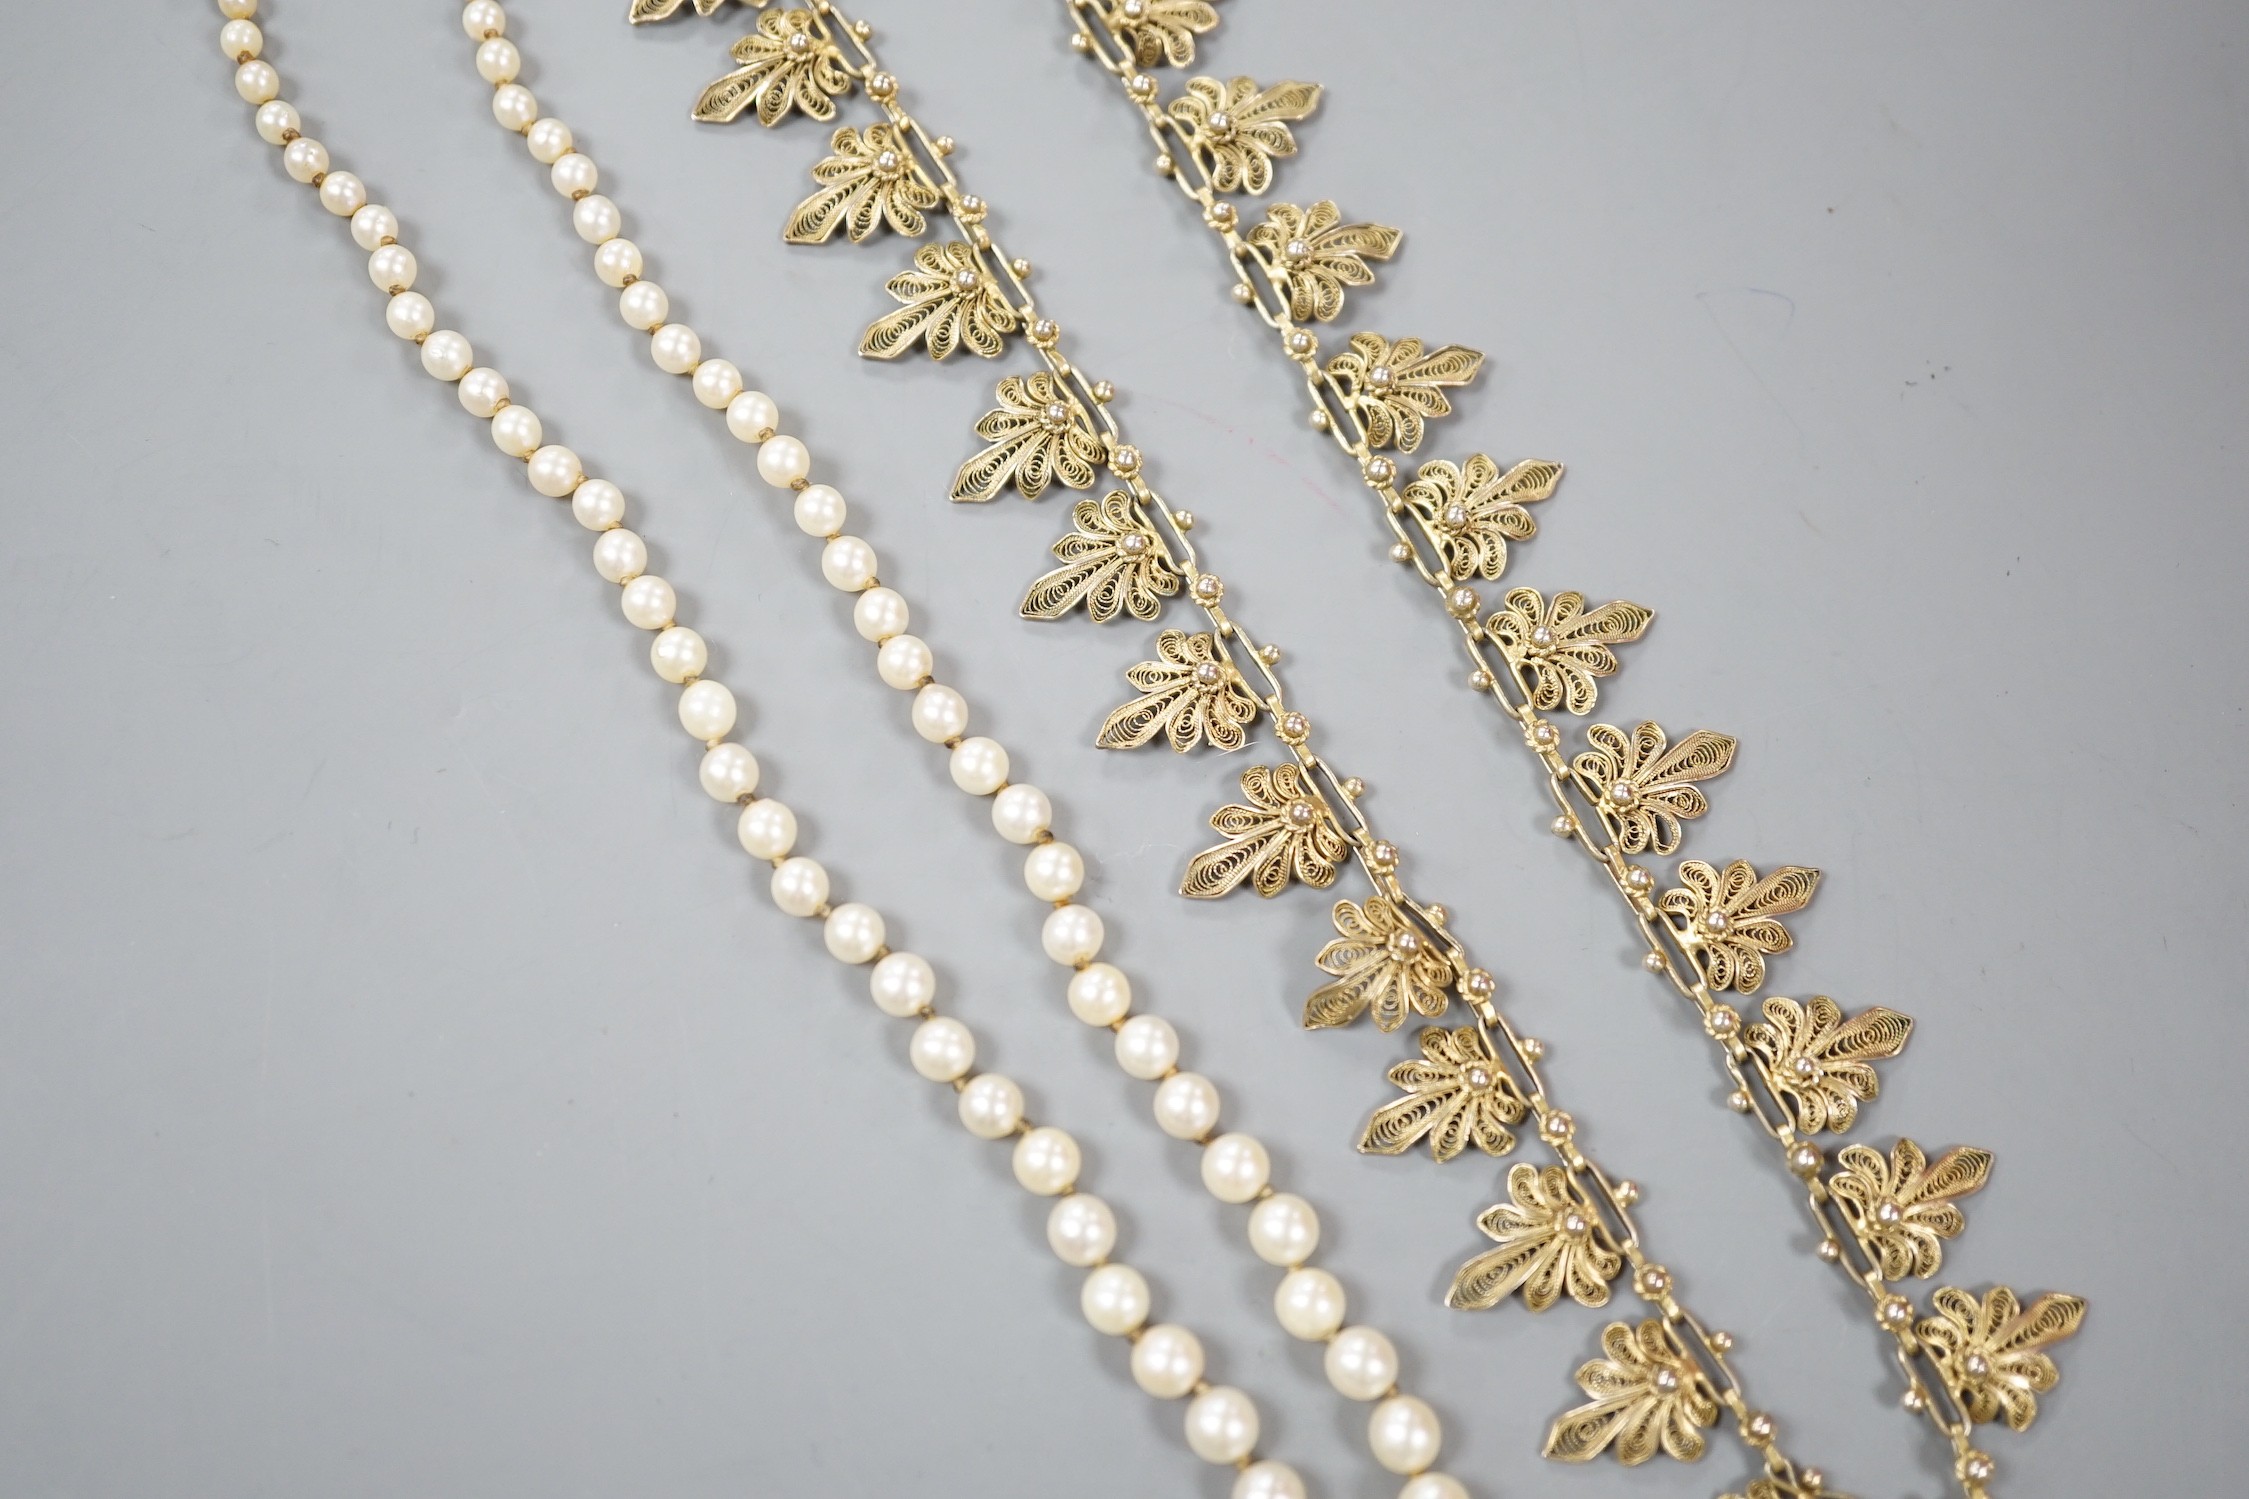 A single strand graduated cultured pearl necklace, with 925 clasp, 21cm and a gilt white metal filigree necklace.